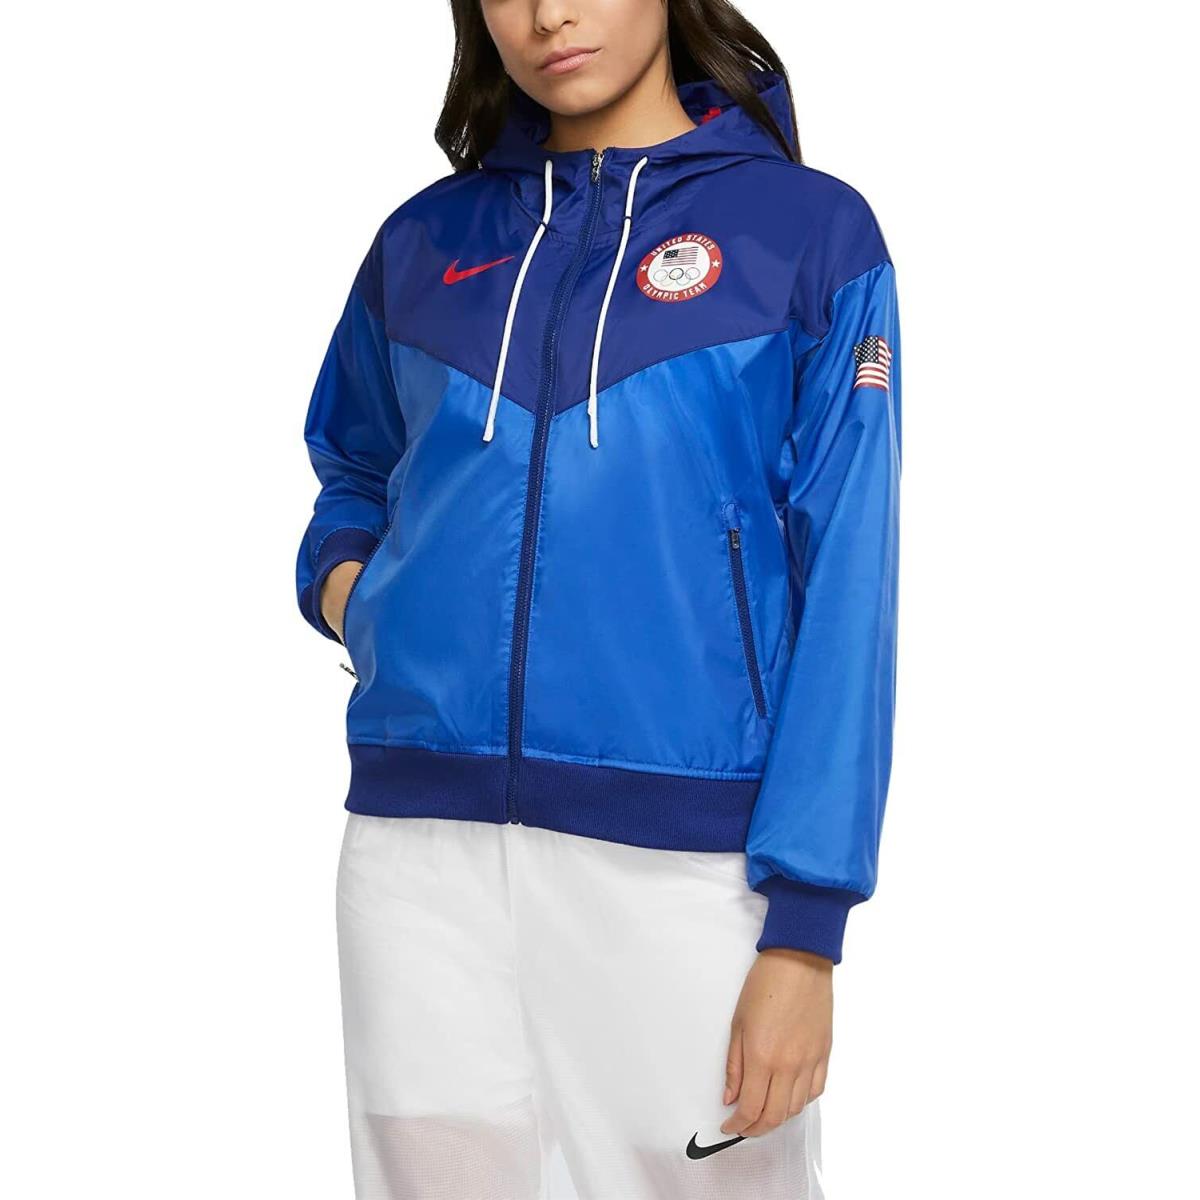 Nike Team Usa Olympic Windrunner Woven Jacket Womens M L CQ7263 451 | 883212431349 - Nike clothing - Blue |